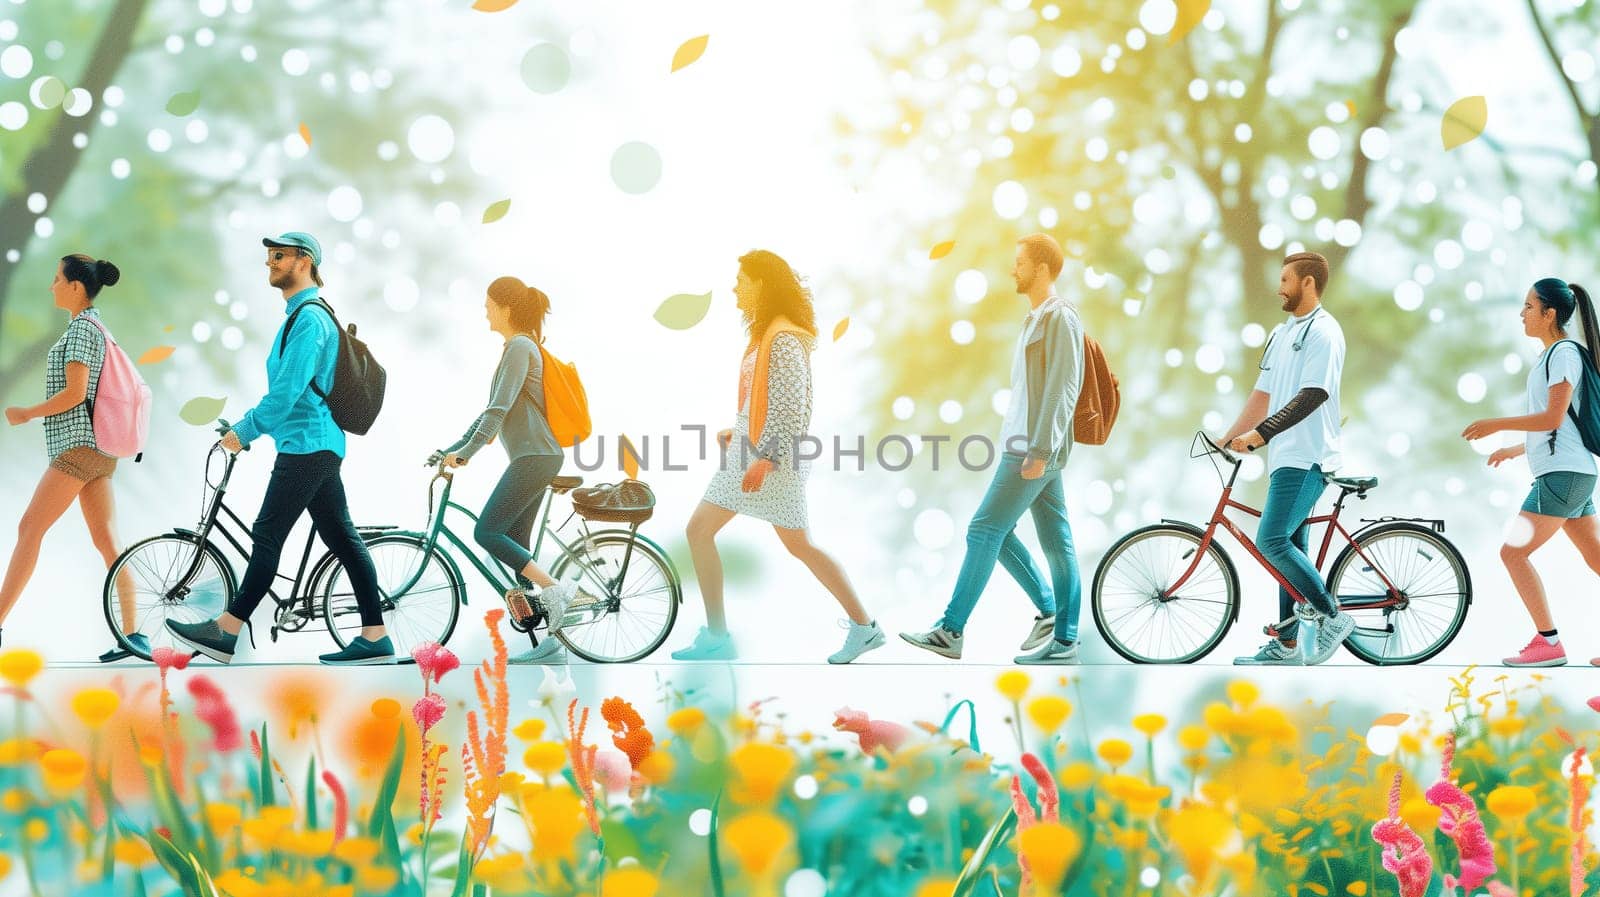 Group of People Riding Bikes Down a Street by TRMK